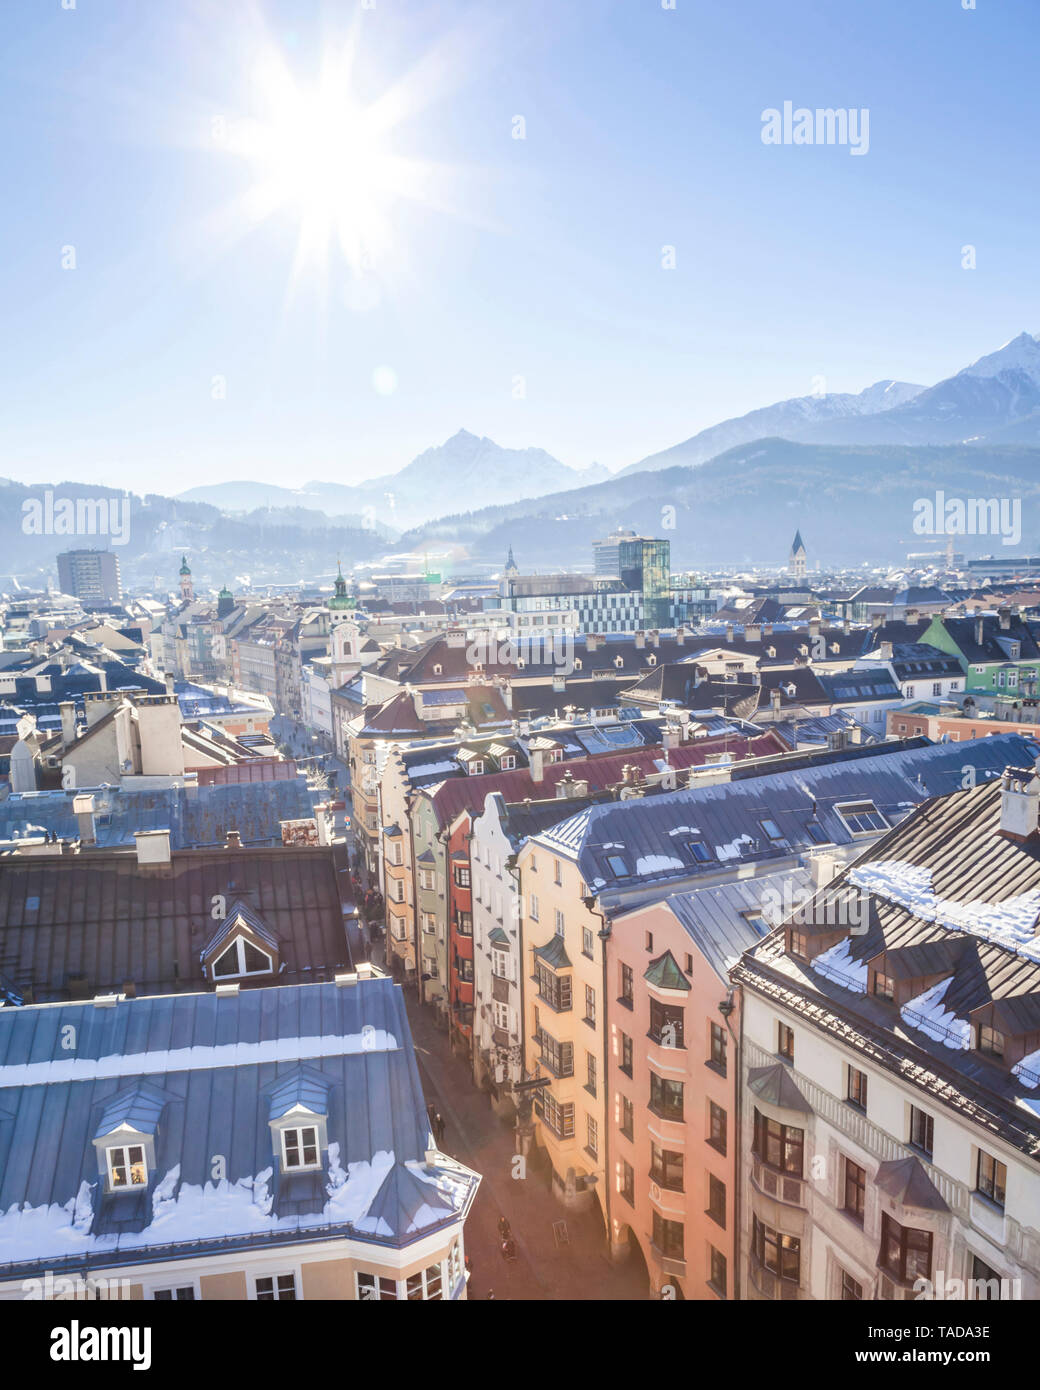 Austria, Tyrol, Innsbruck, Panoramic views of the city with snow-capped Alps in background Stock Photo